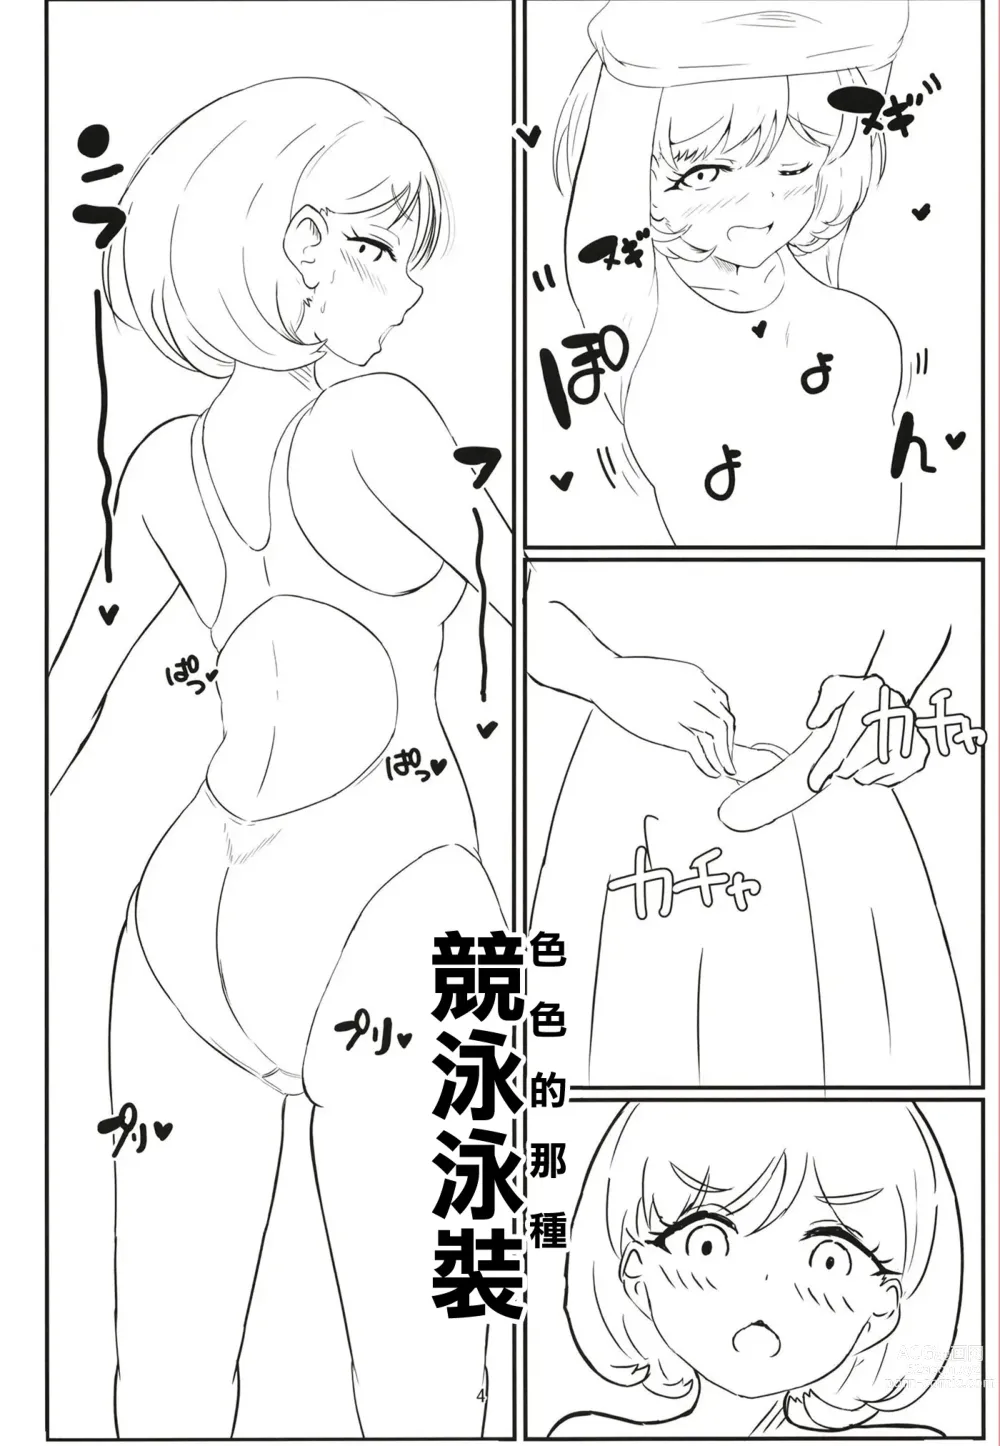 Page 3 of doujinshi Laundry Labyrinth